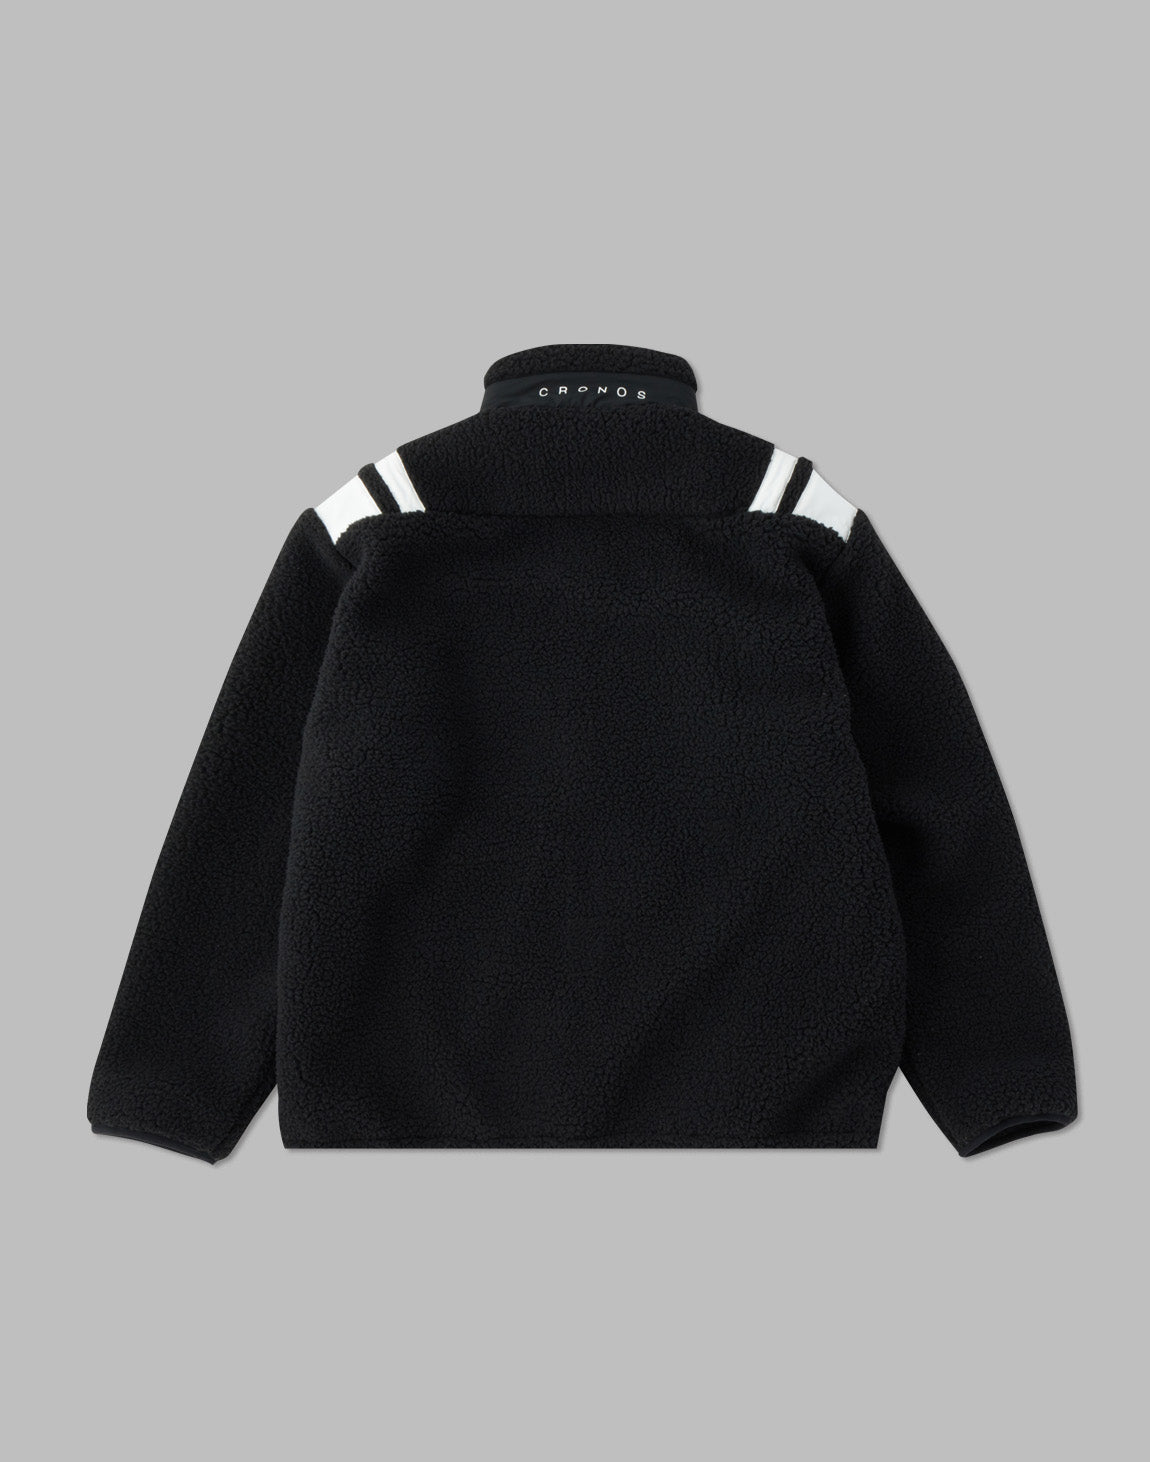 CRONOS ACTIVE JUMPER – クロノス CRONOS Official Store